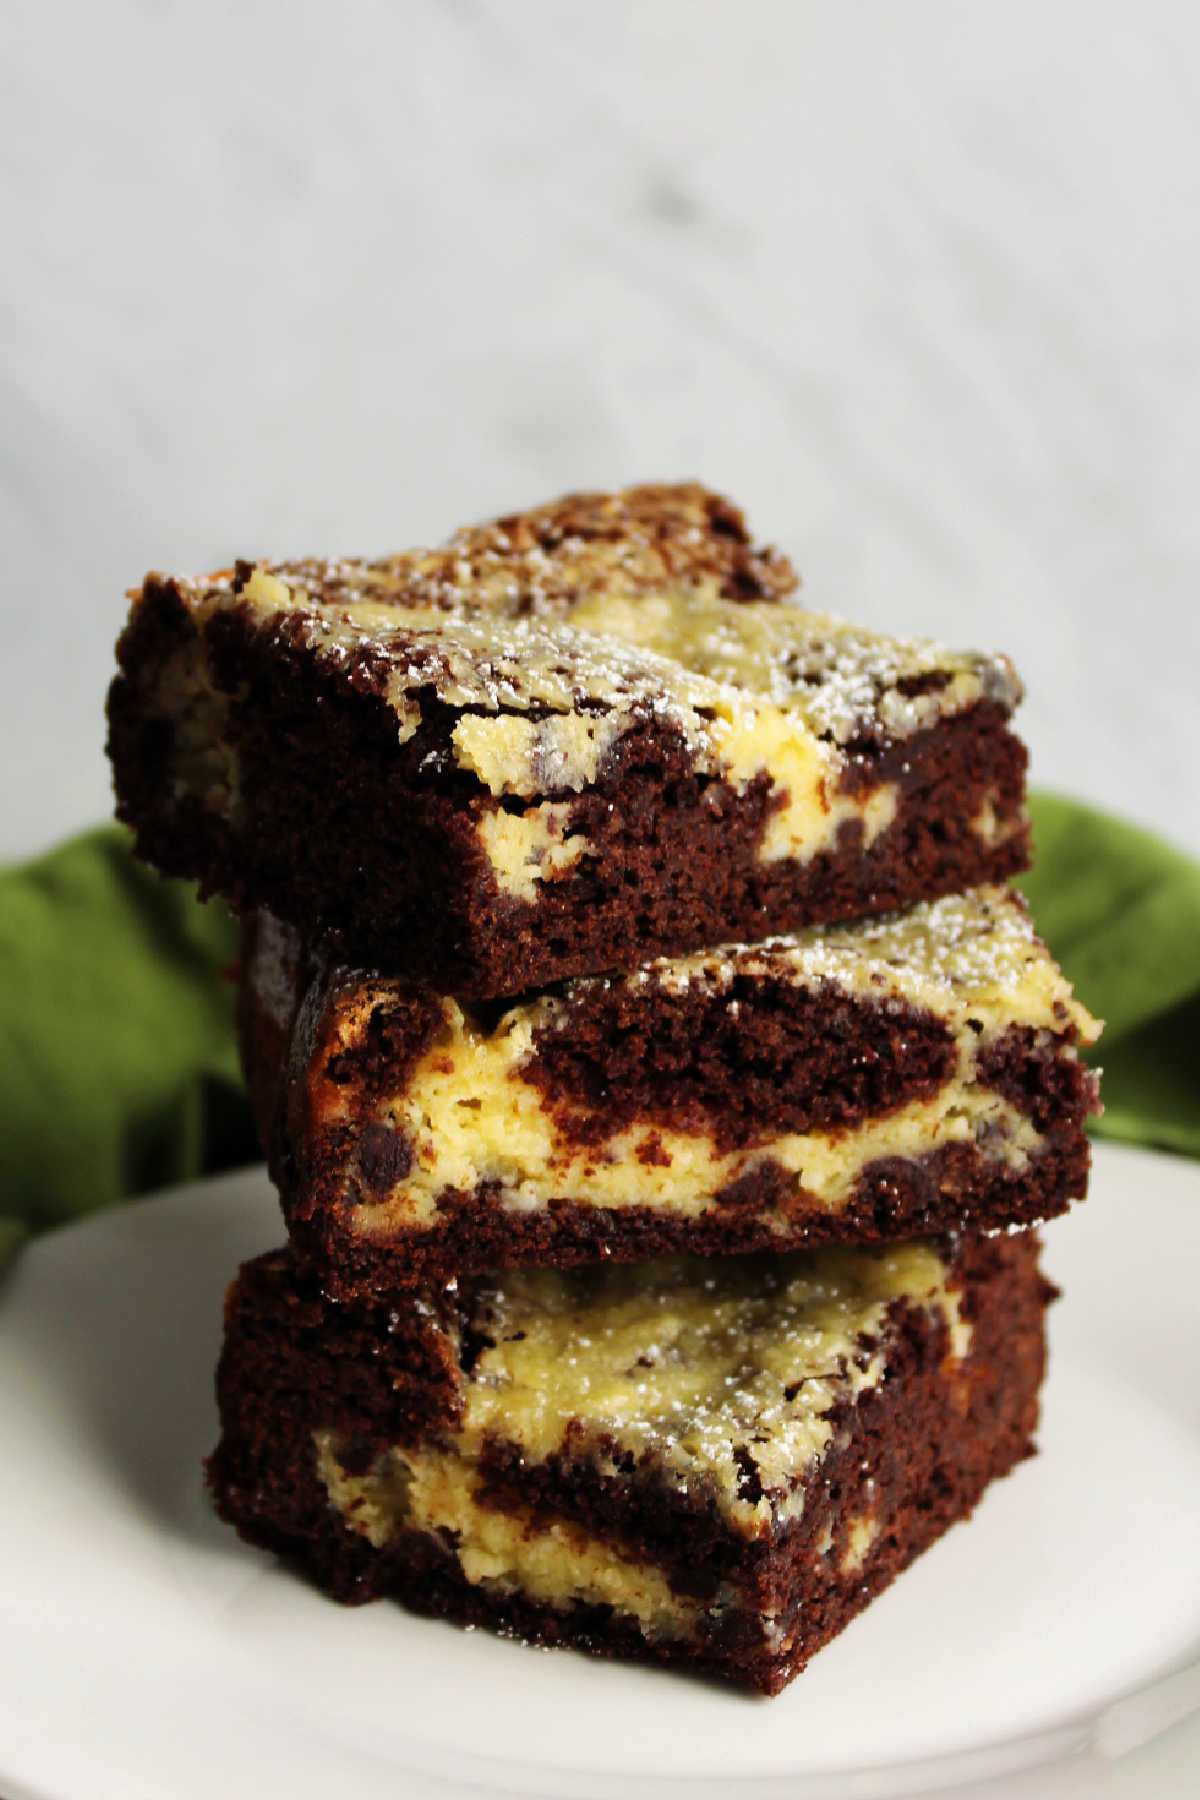 Pieces of chocolate chip gooey butter cake stacked on top of one another, ready to eat.